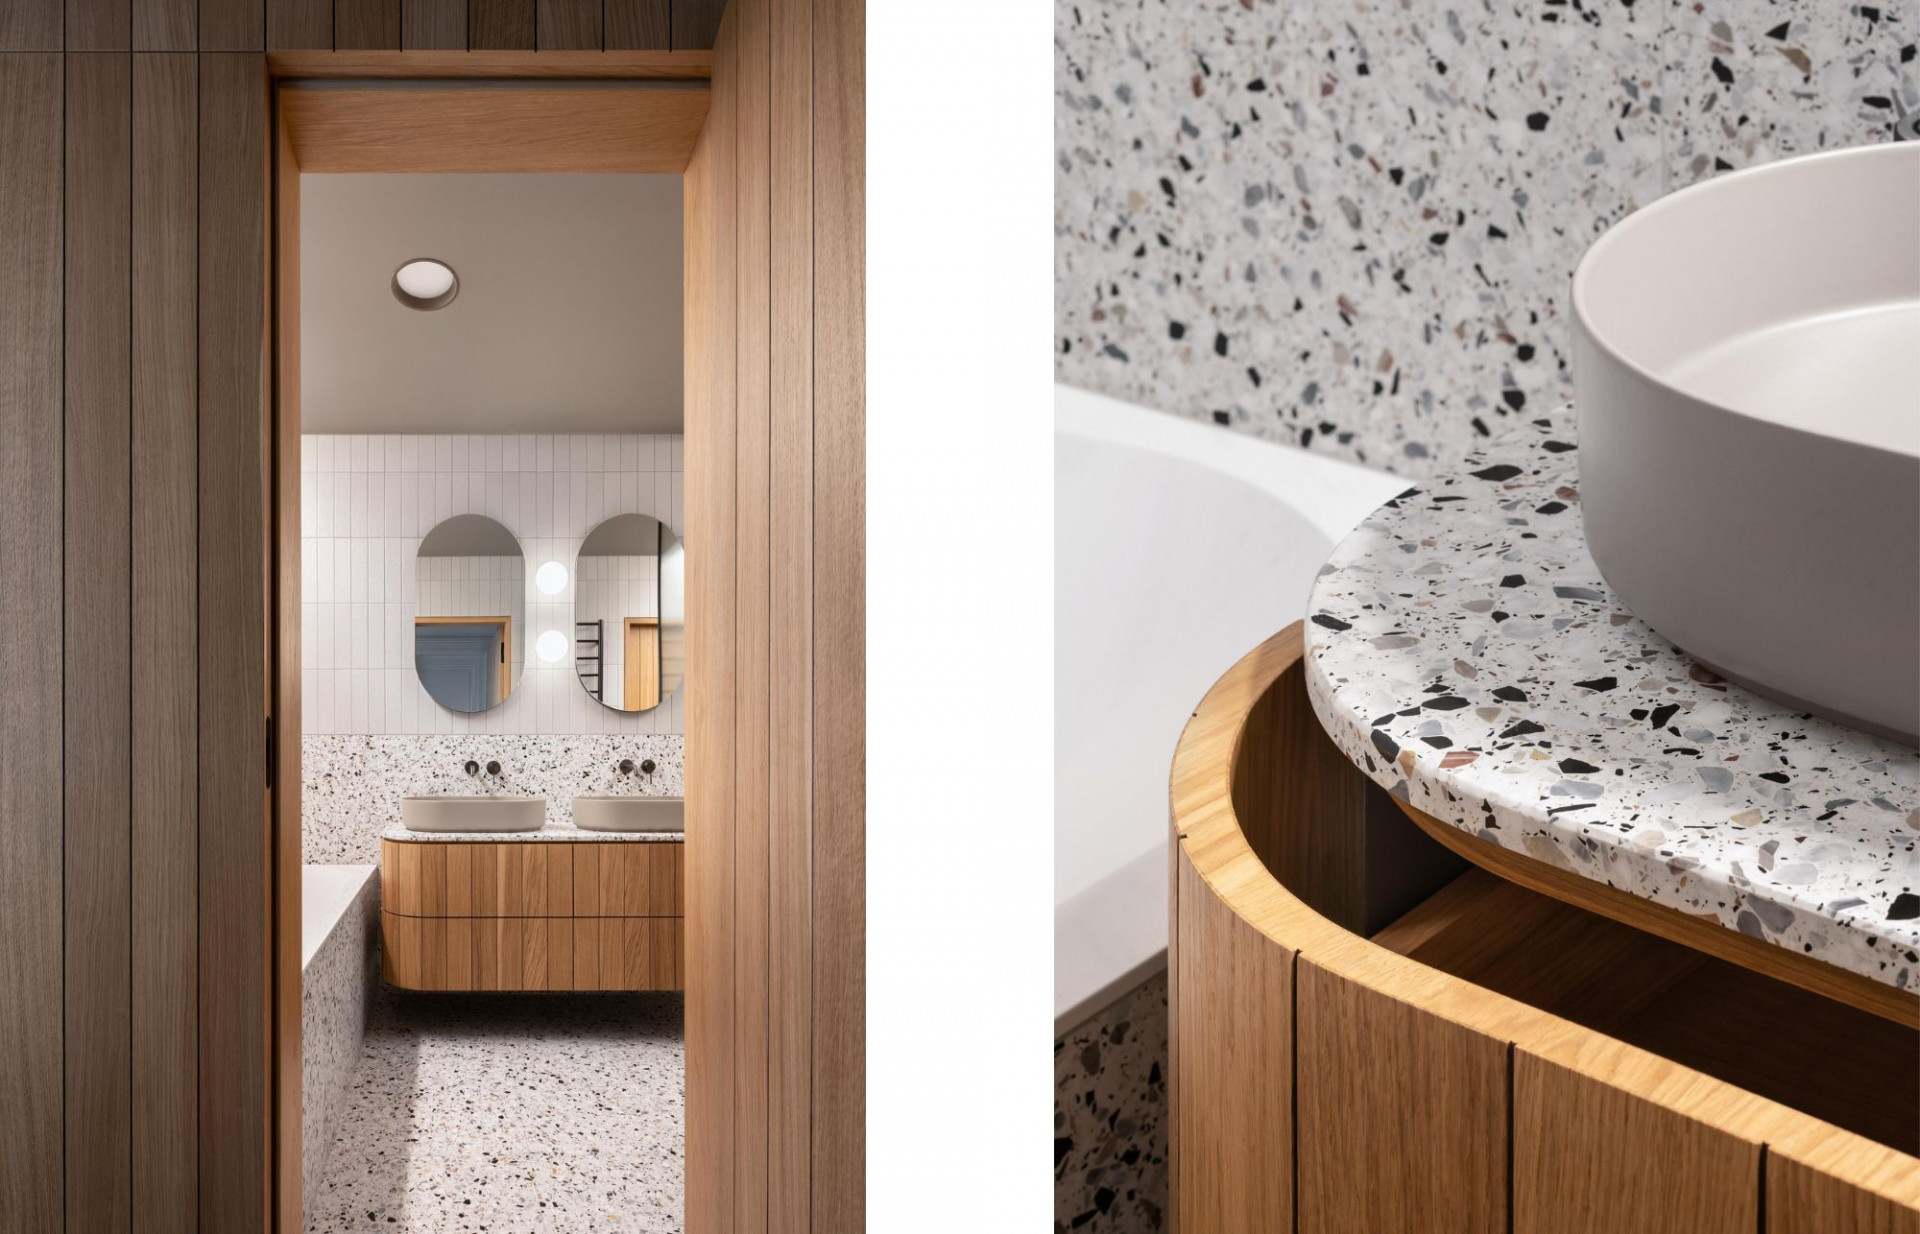 The architects chose terrazzo flooring and walls for the bathroom as it's commonly found in terrace apartments.